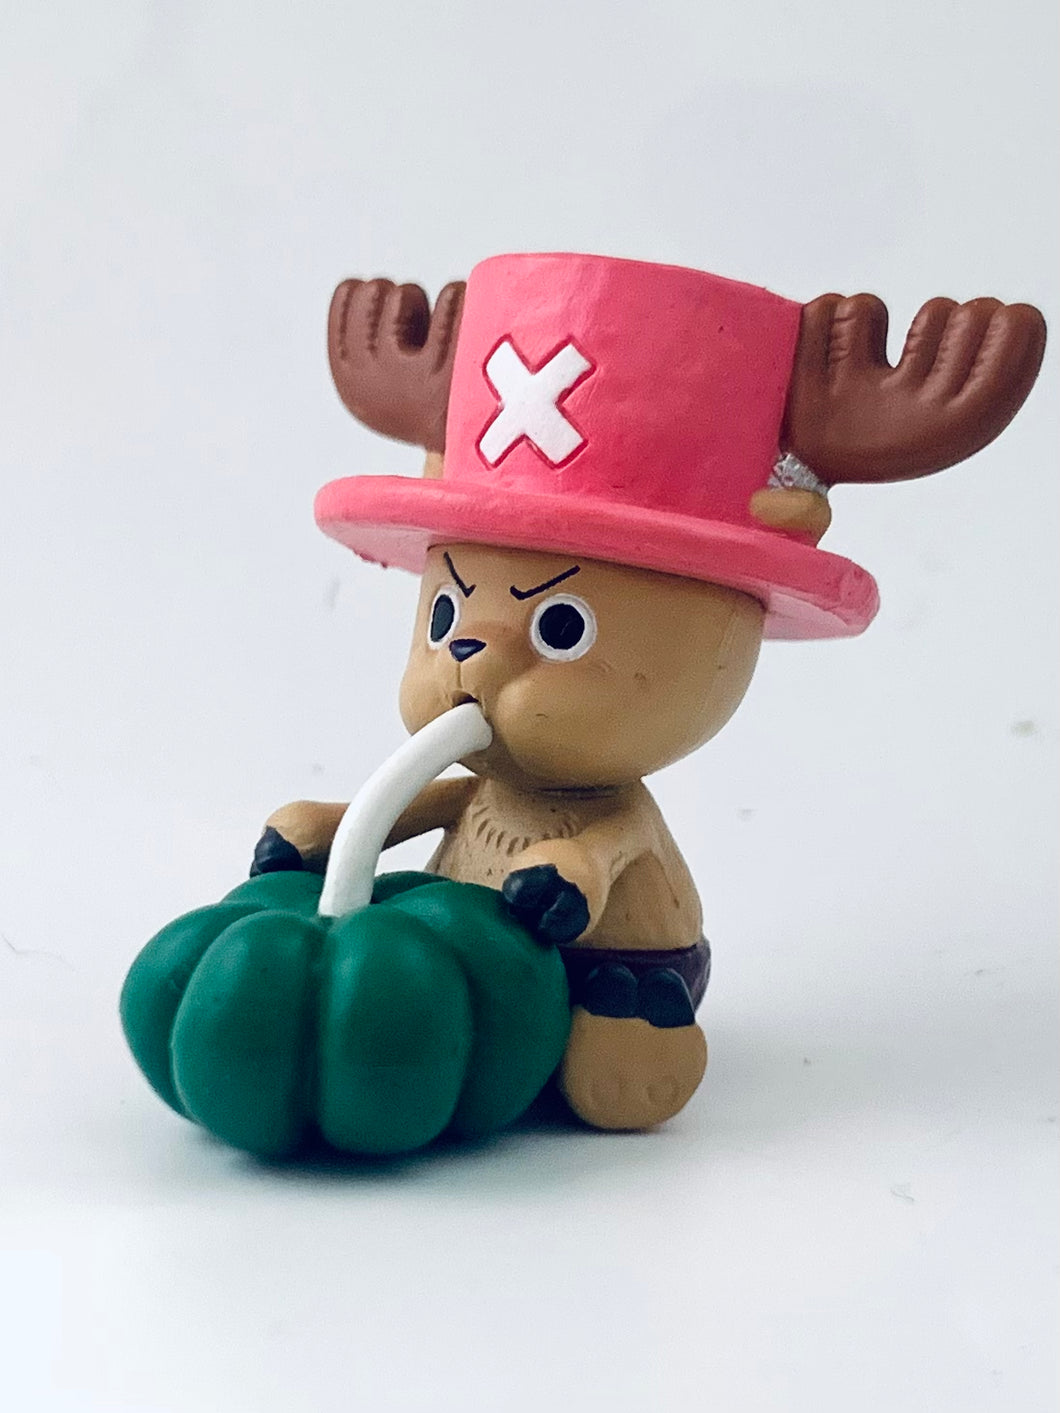 One Piece - Tony Tony Chopper - OP Trading Figure Collection